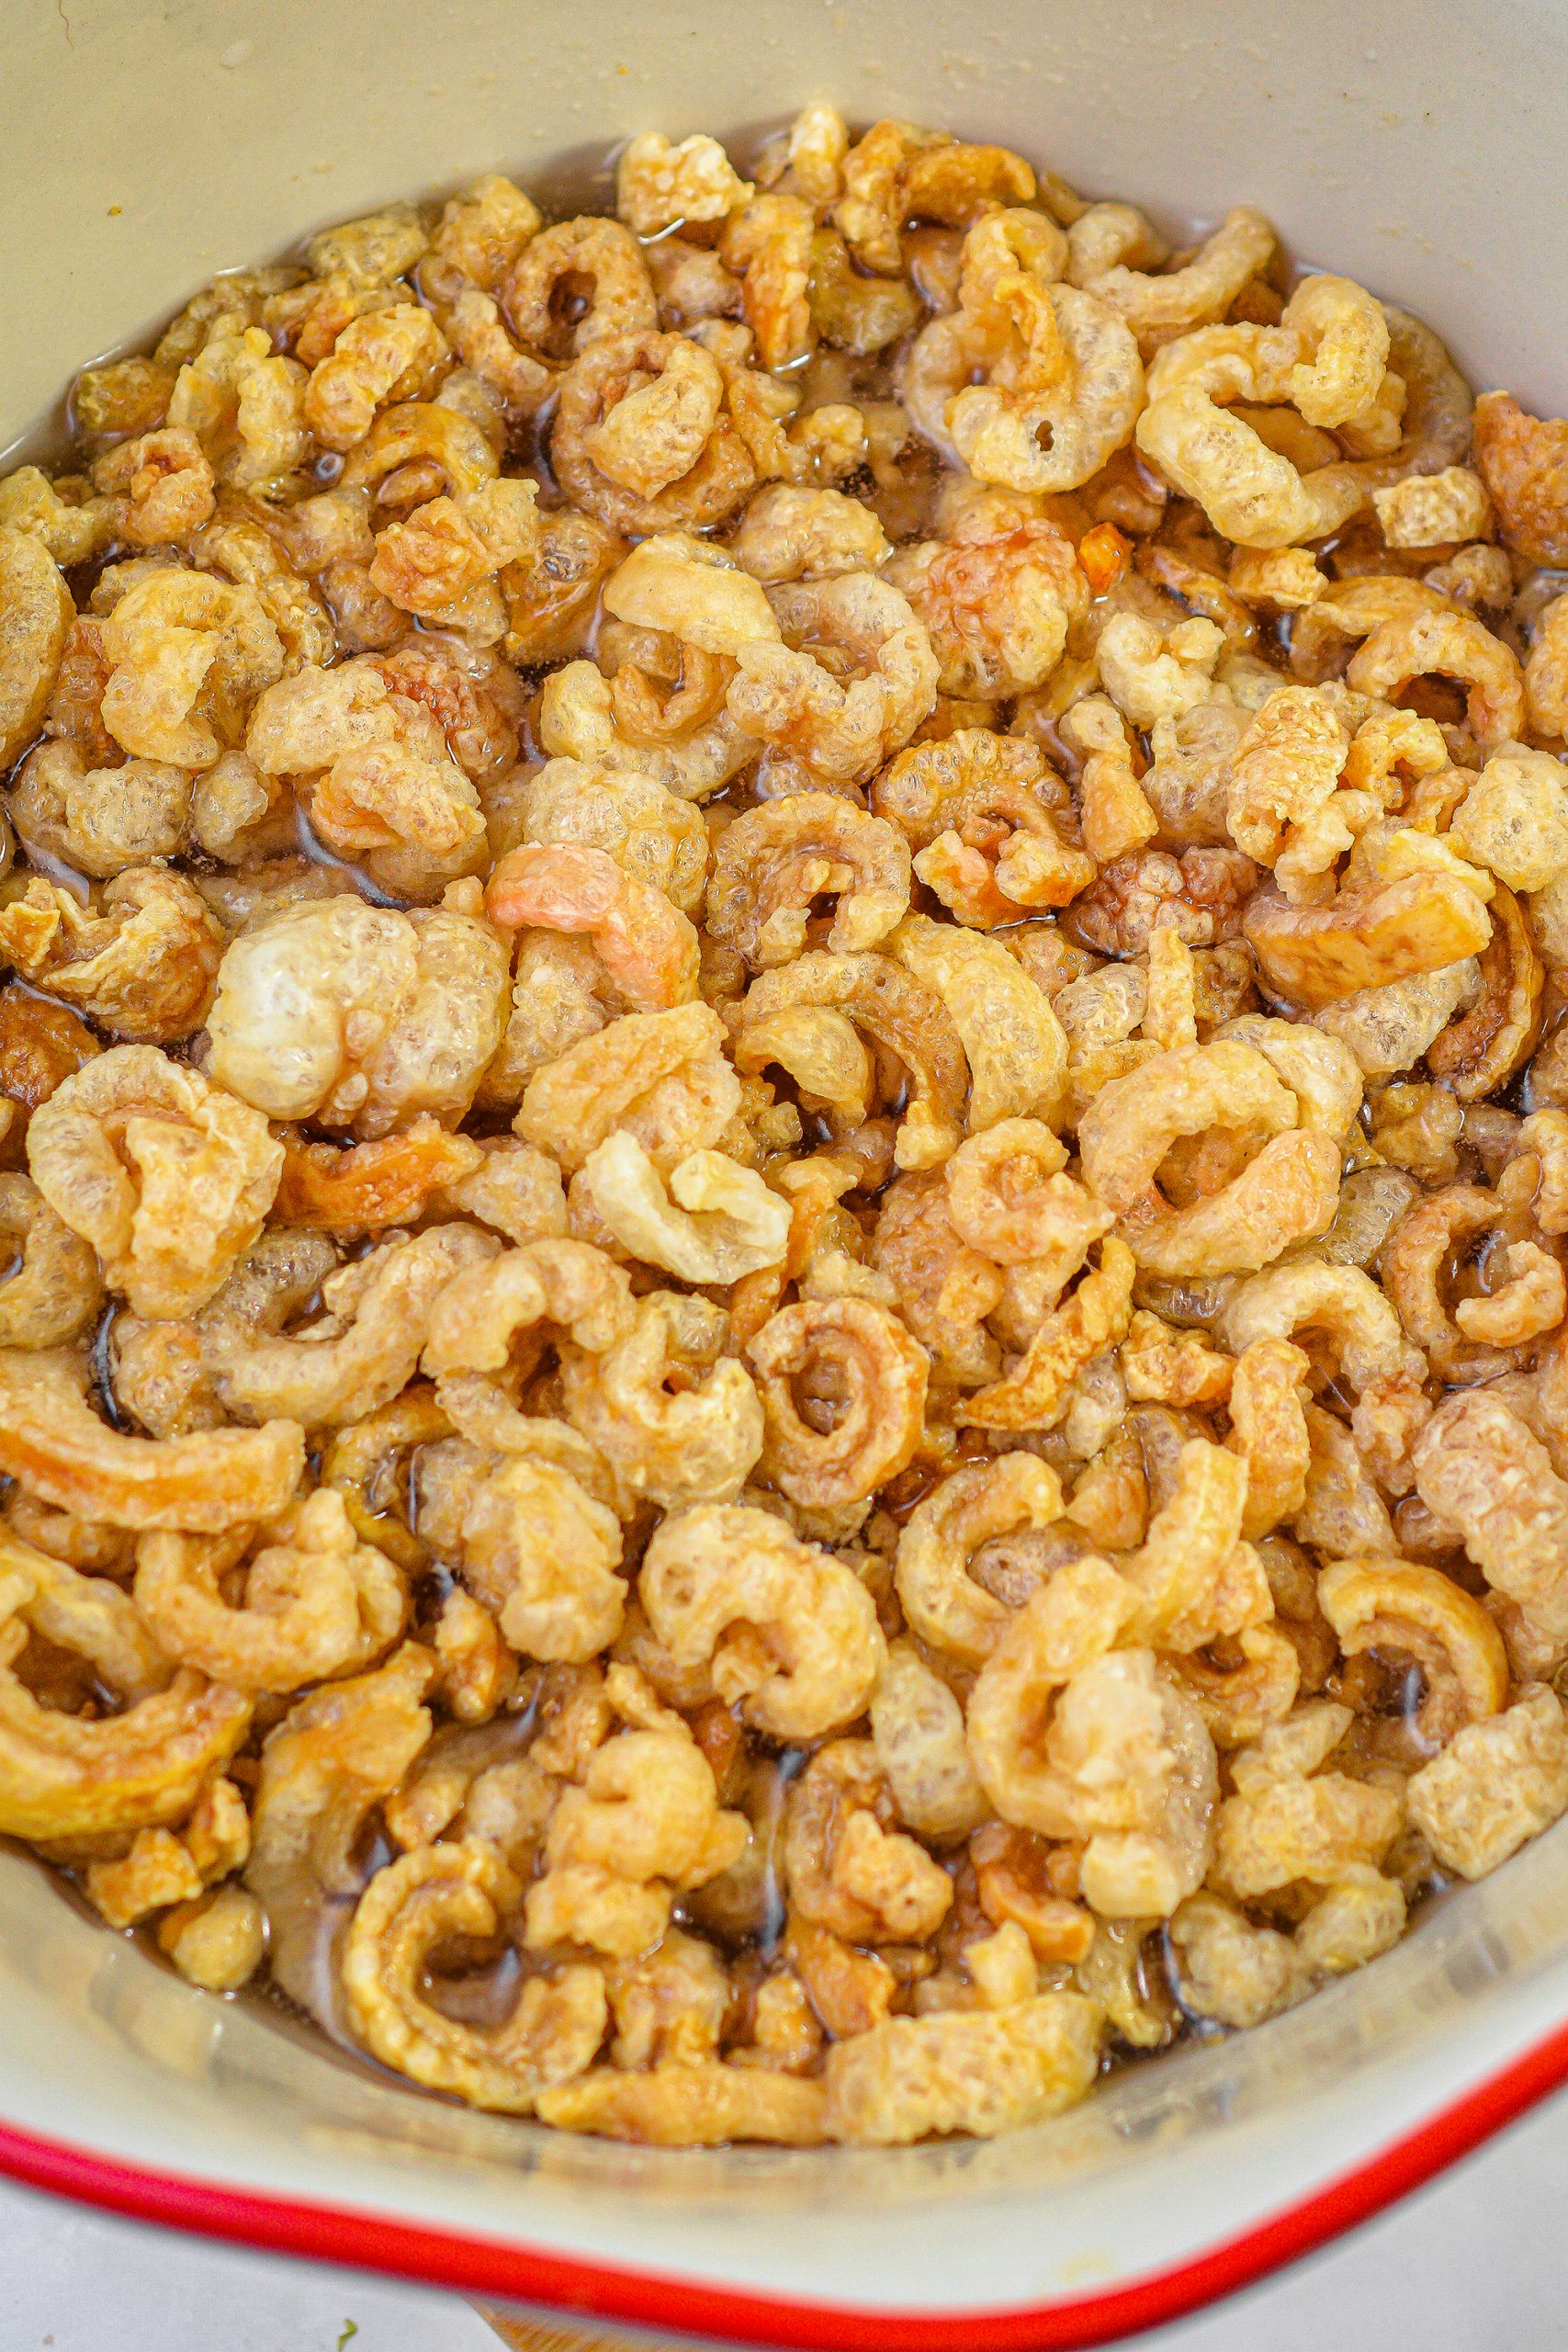 Place the cracklins in a large bowl and cover with water. Allow to soak for 20 minutes.